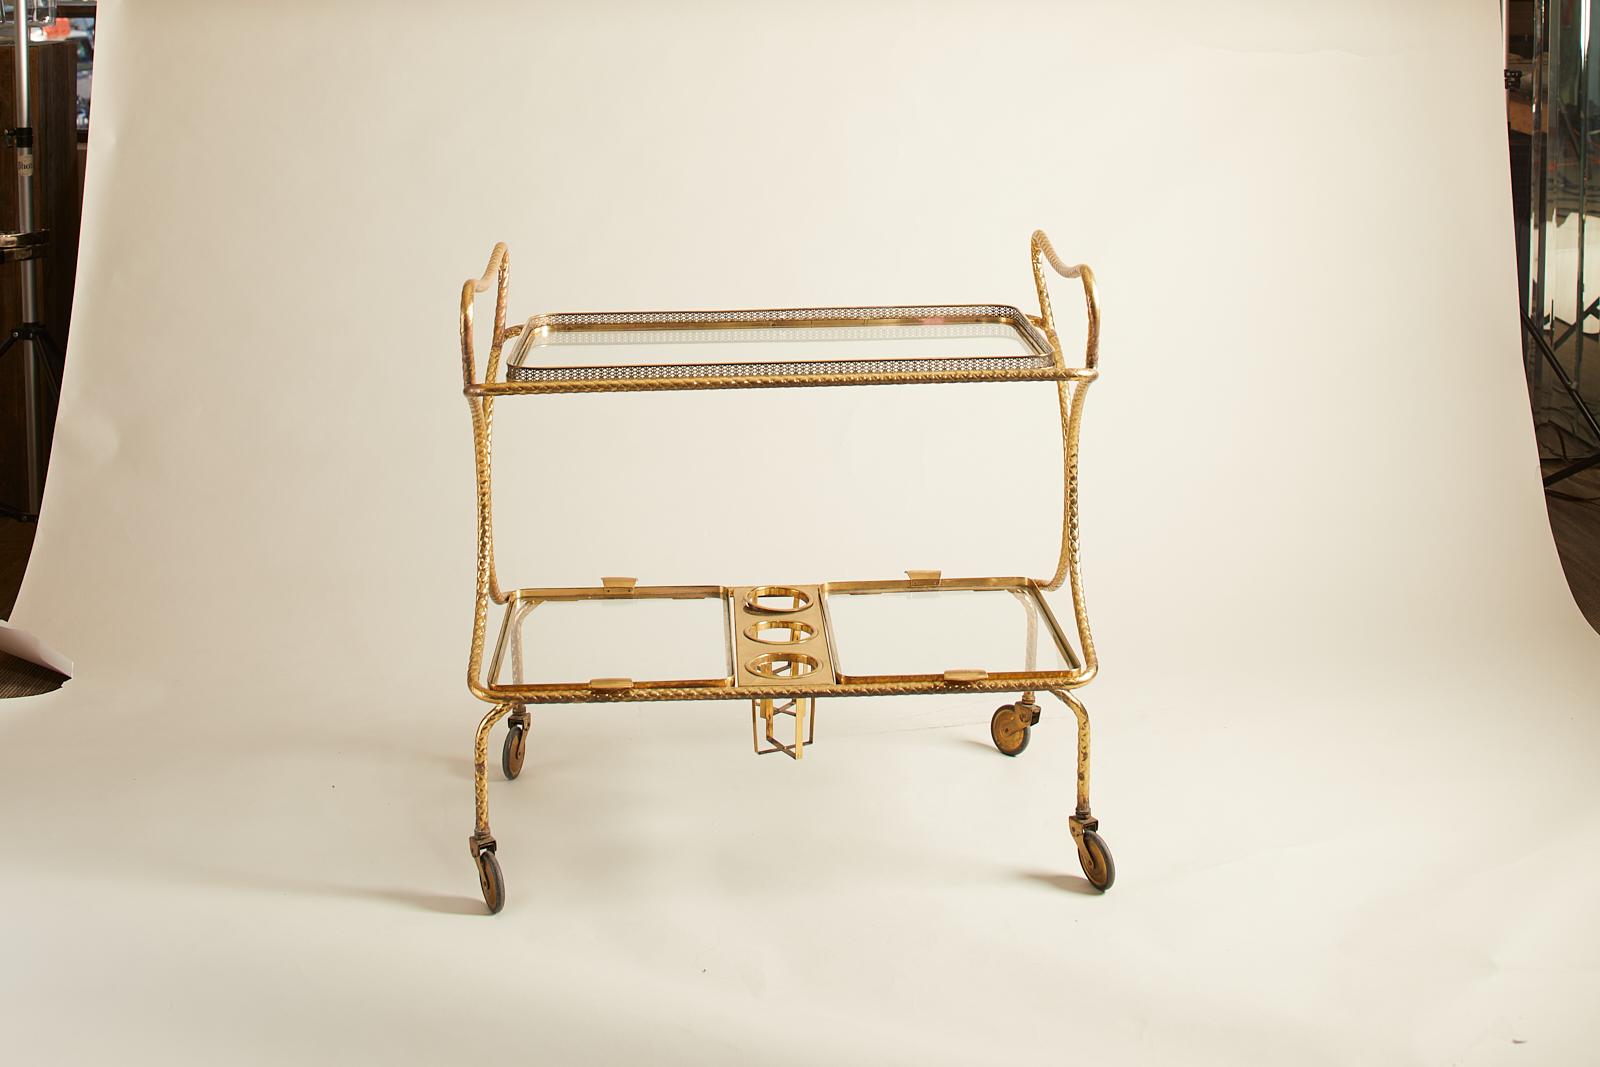 1960s French Maison Jansen bar cart in brass with wine caddy.